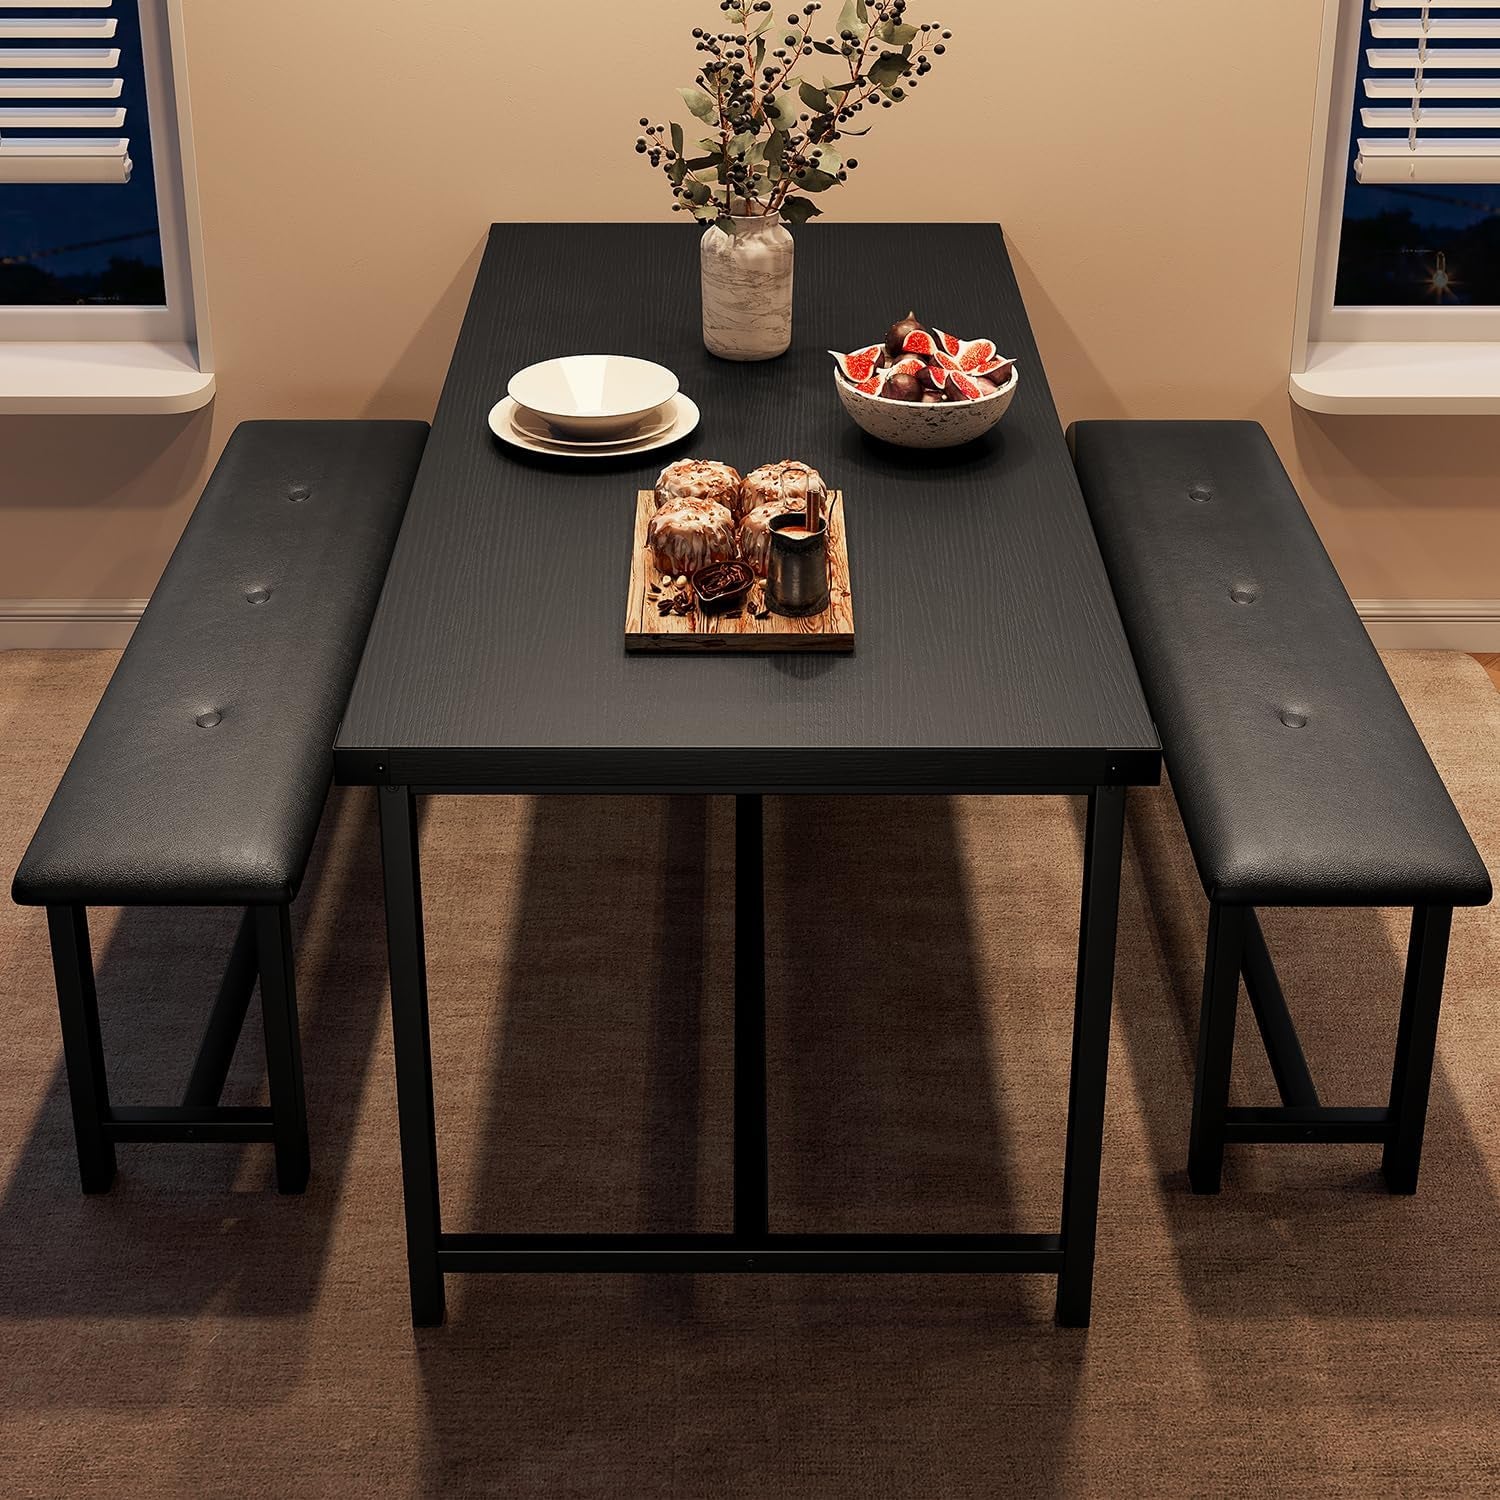 Dining Table Set for 4, Kitchen Table Set for 4 with Upholstered Benches, Rectangular Dining Room Table Set for Small Space, Apartment, Studio, Rustic Black